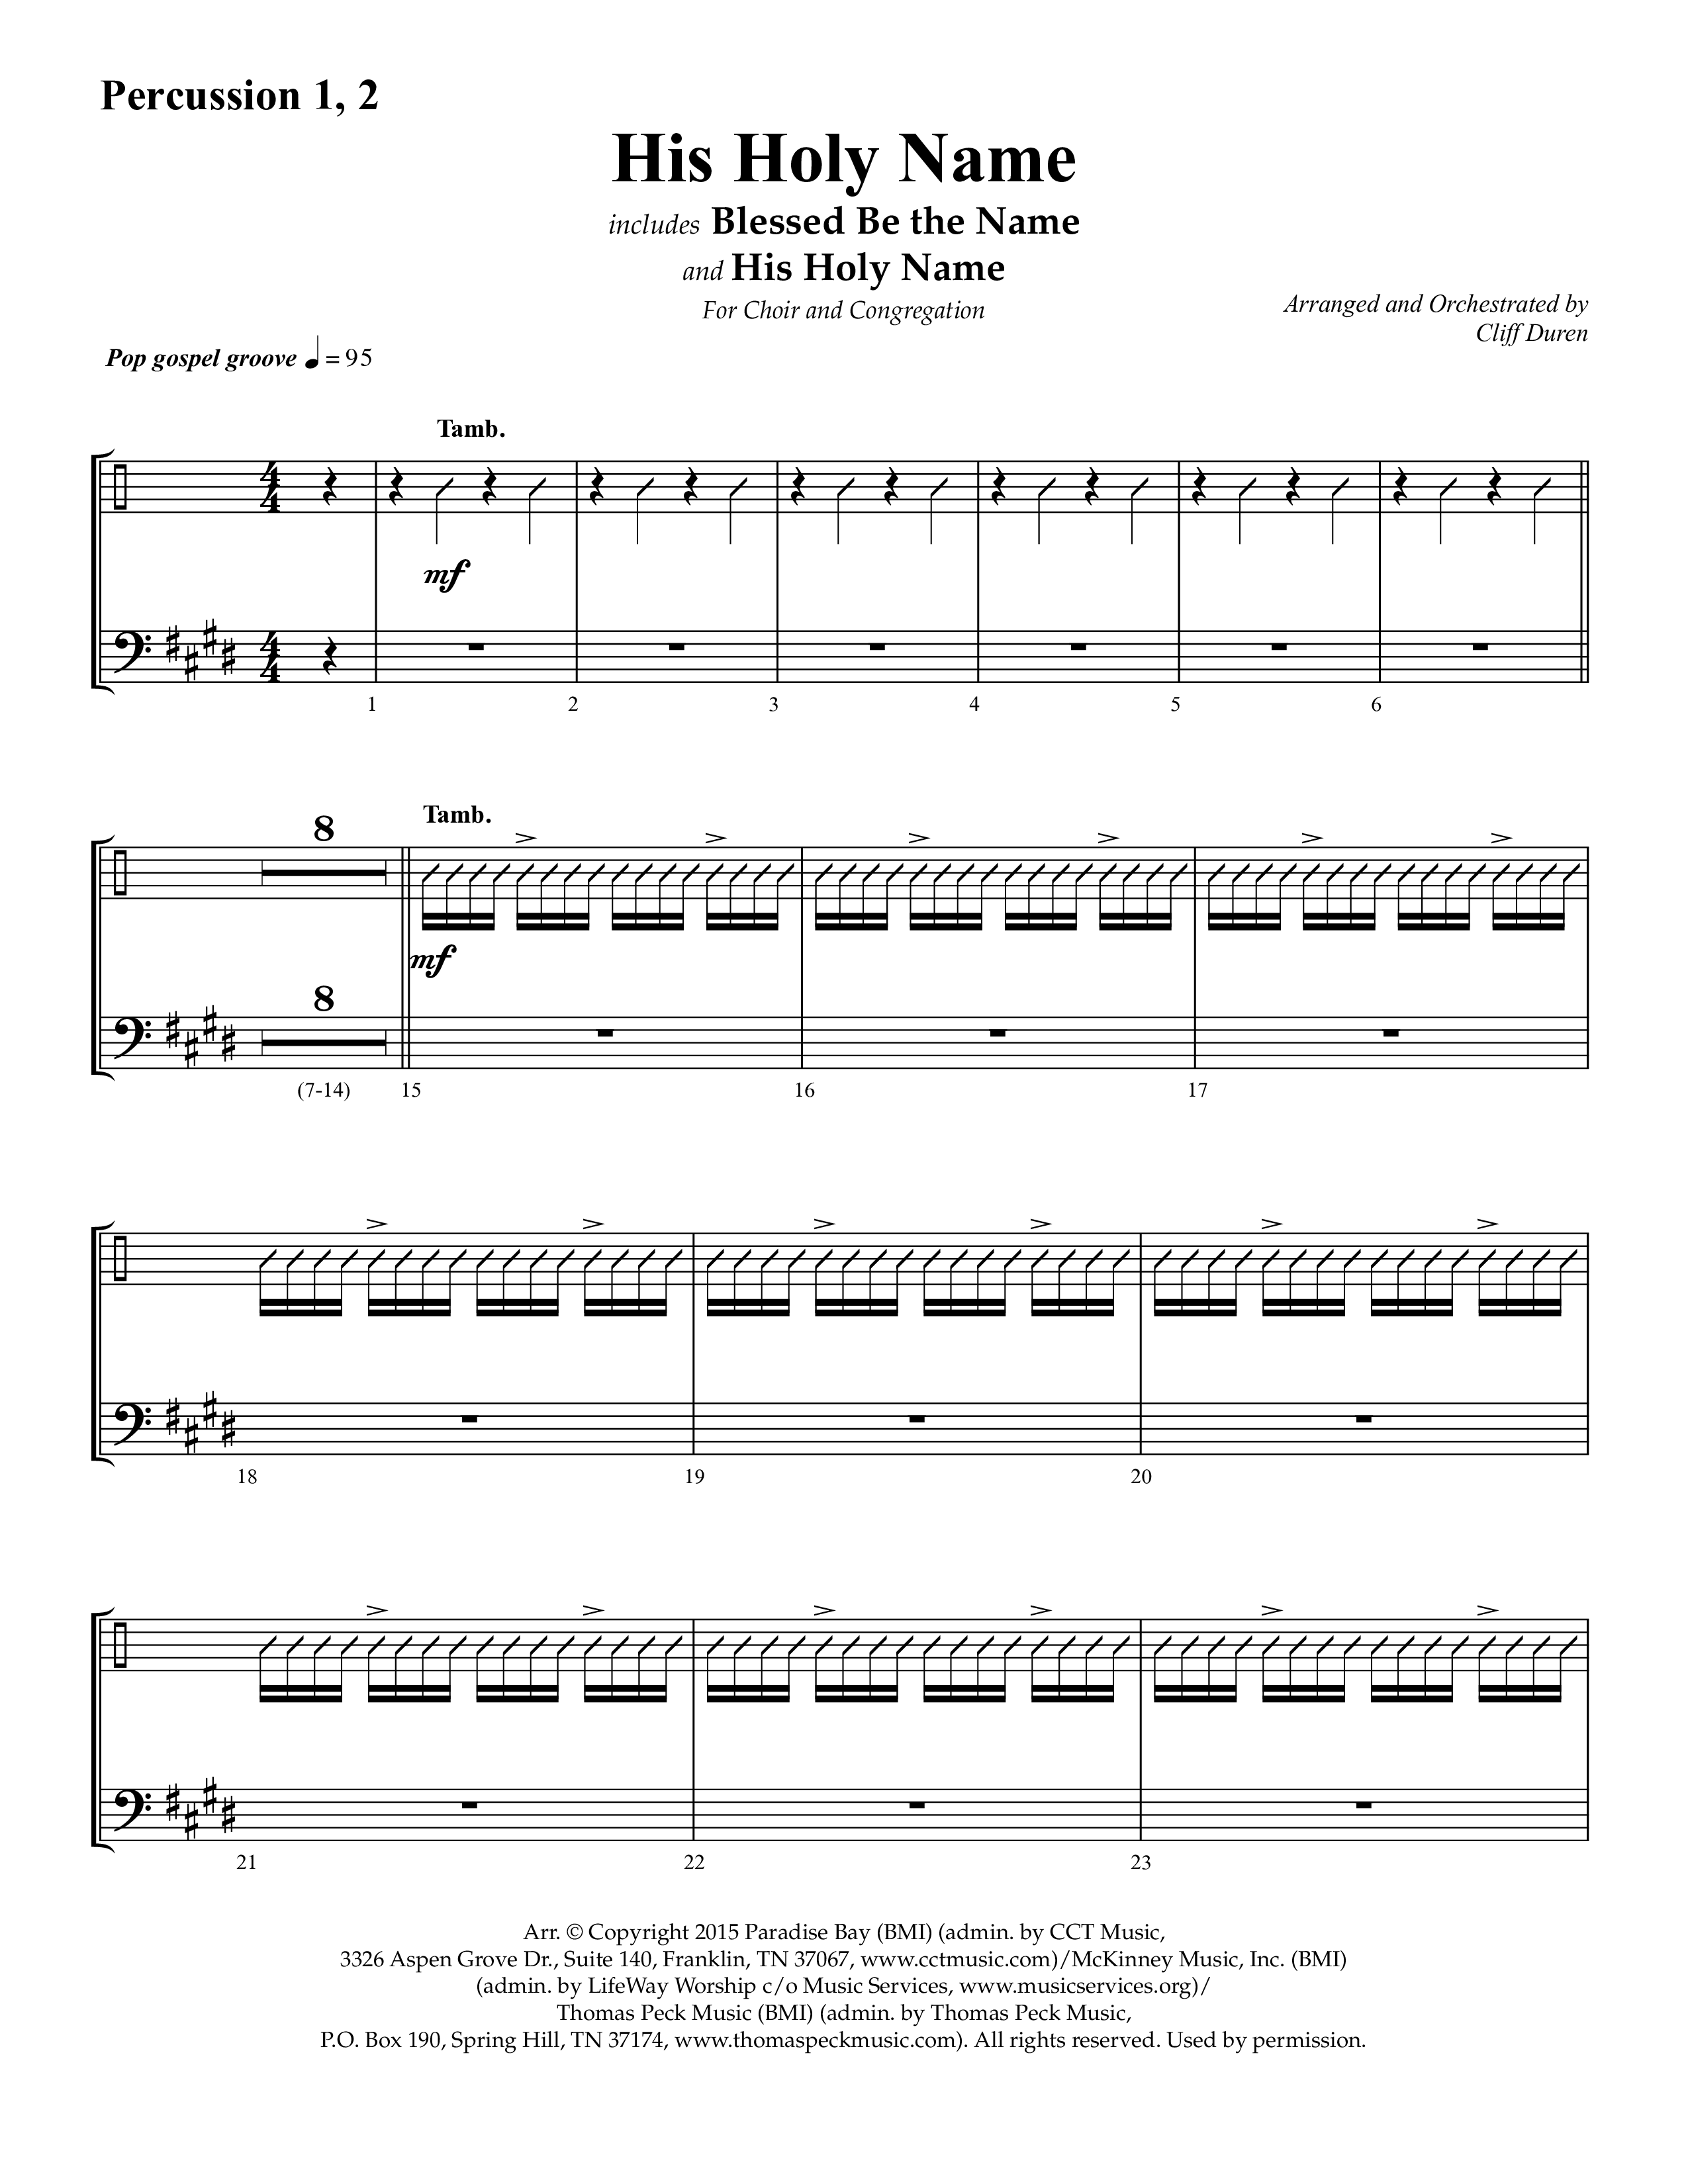 His Holy Name (with Blessed Be The Name) (Choral Anthem SATB) Percussion 1/2 (Lifeway Choral / Arr. Cliff Duren)